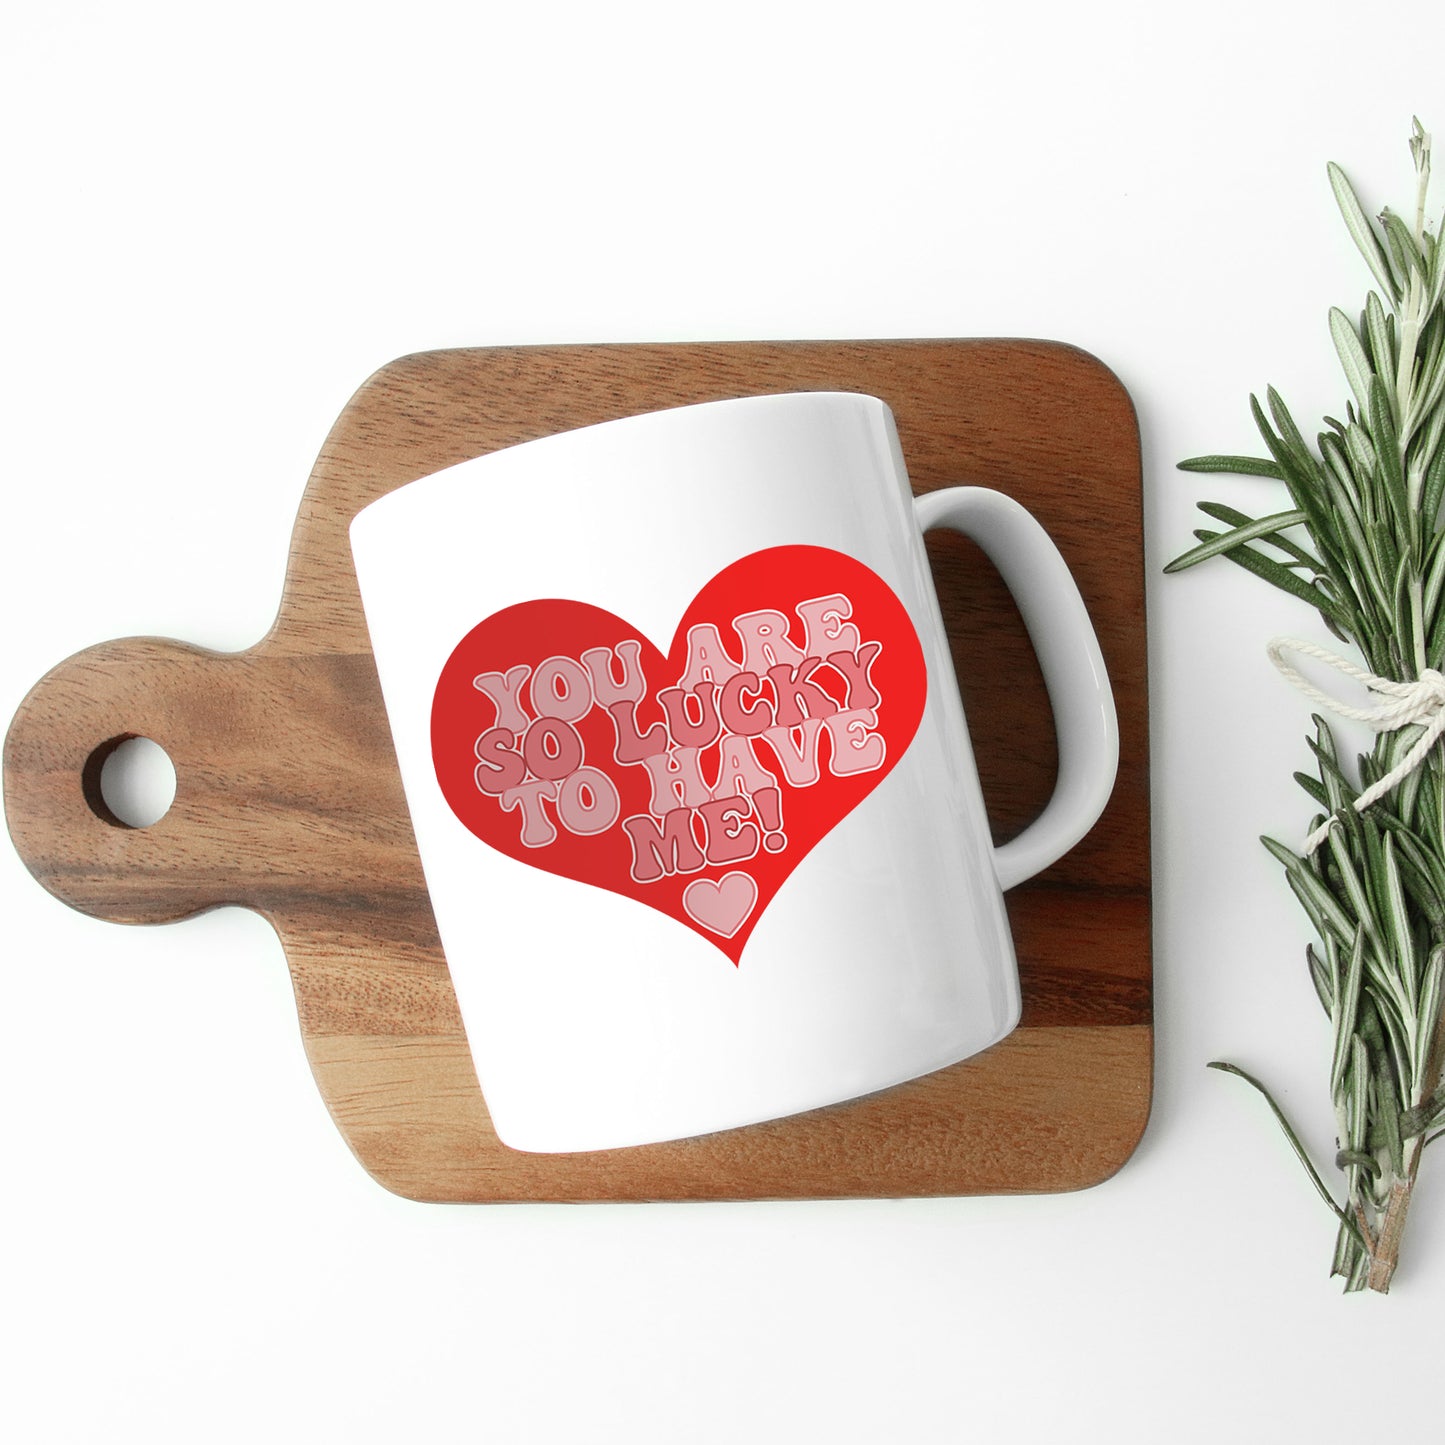 You Are So Lucky To Have Me Mug and/or Coaster Gift  - Always Looking Good -   